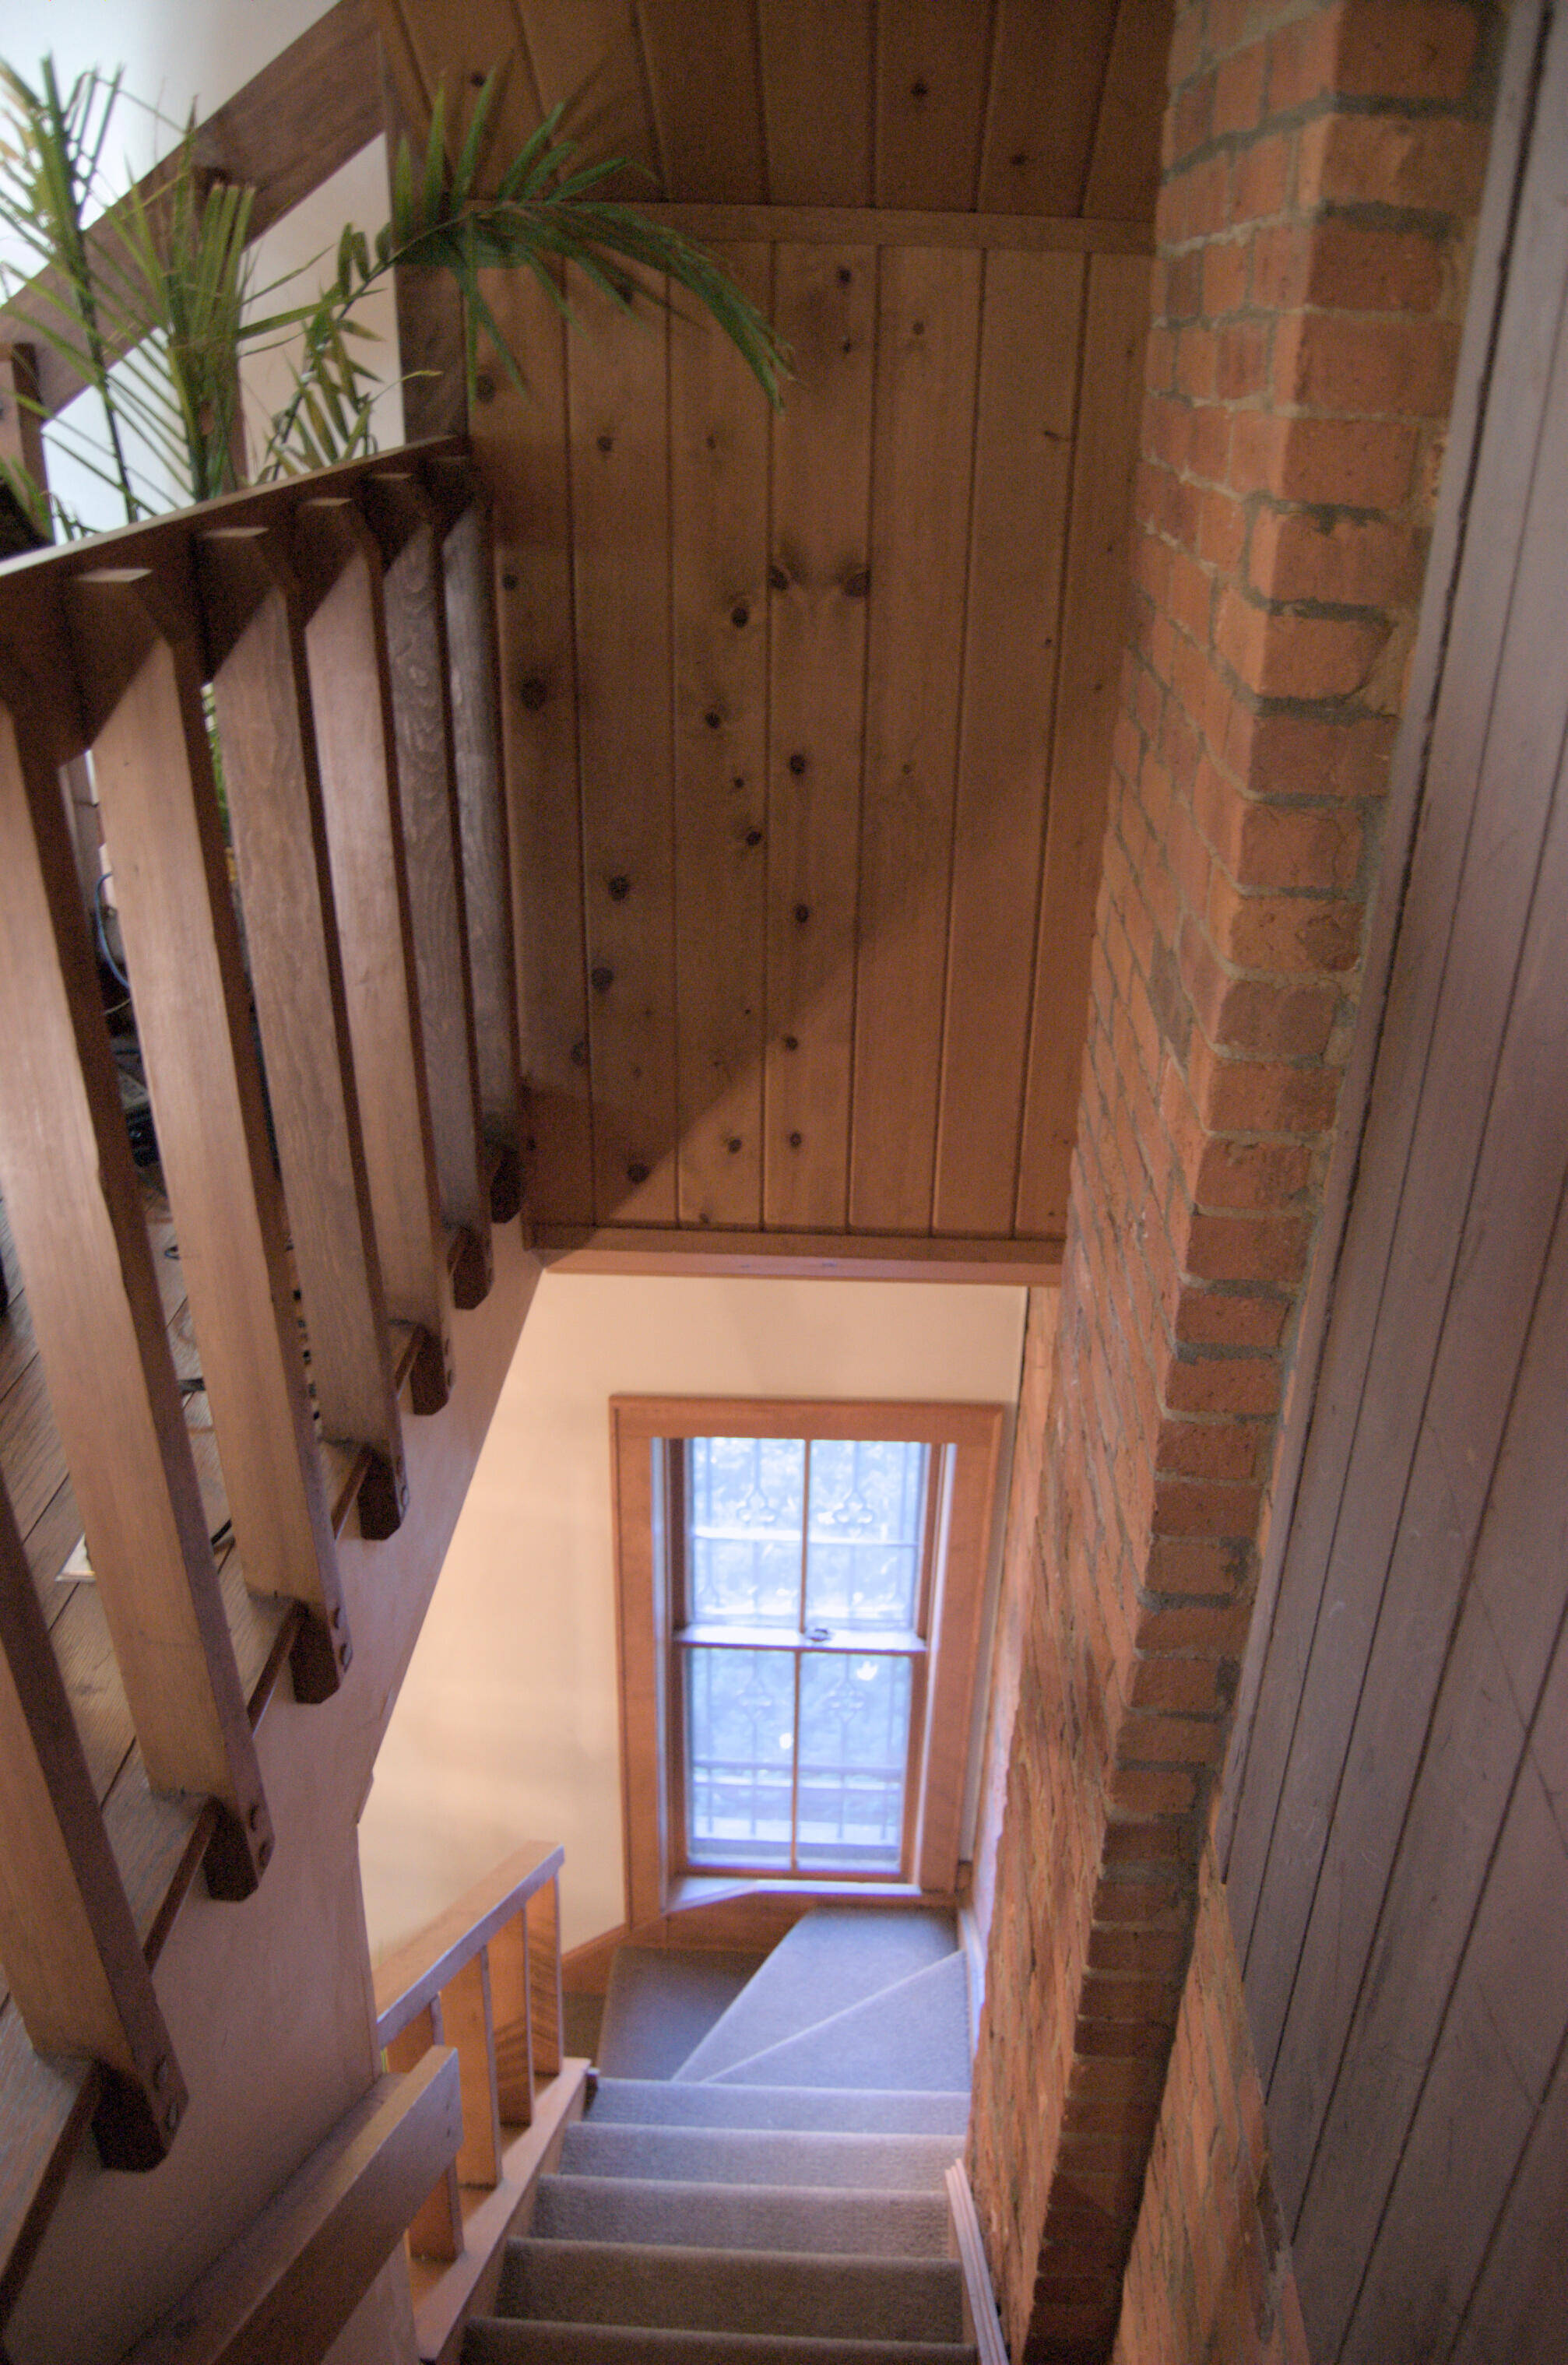 2nd floor of willett house looking down stairs